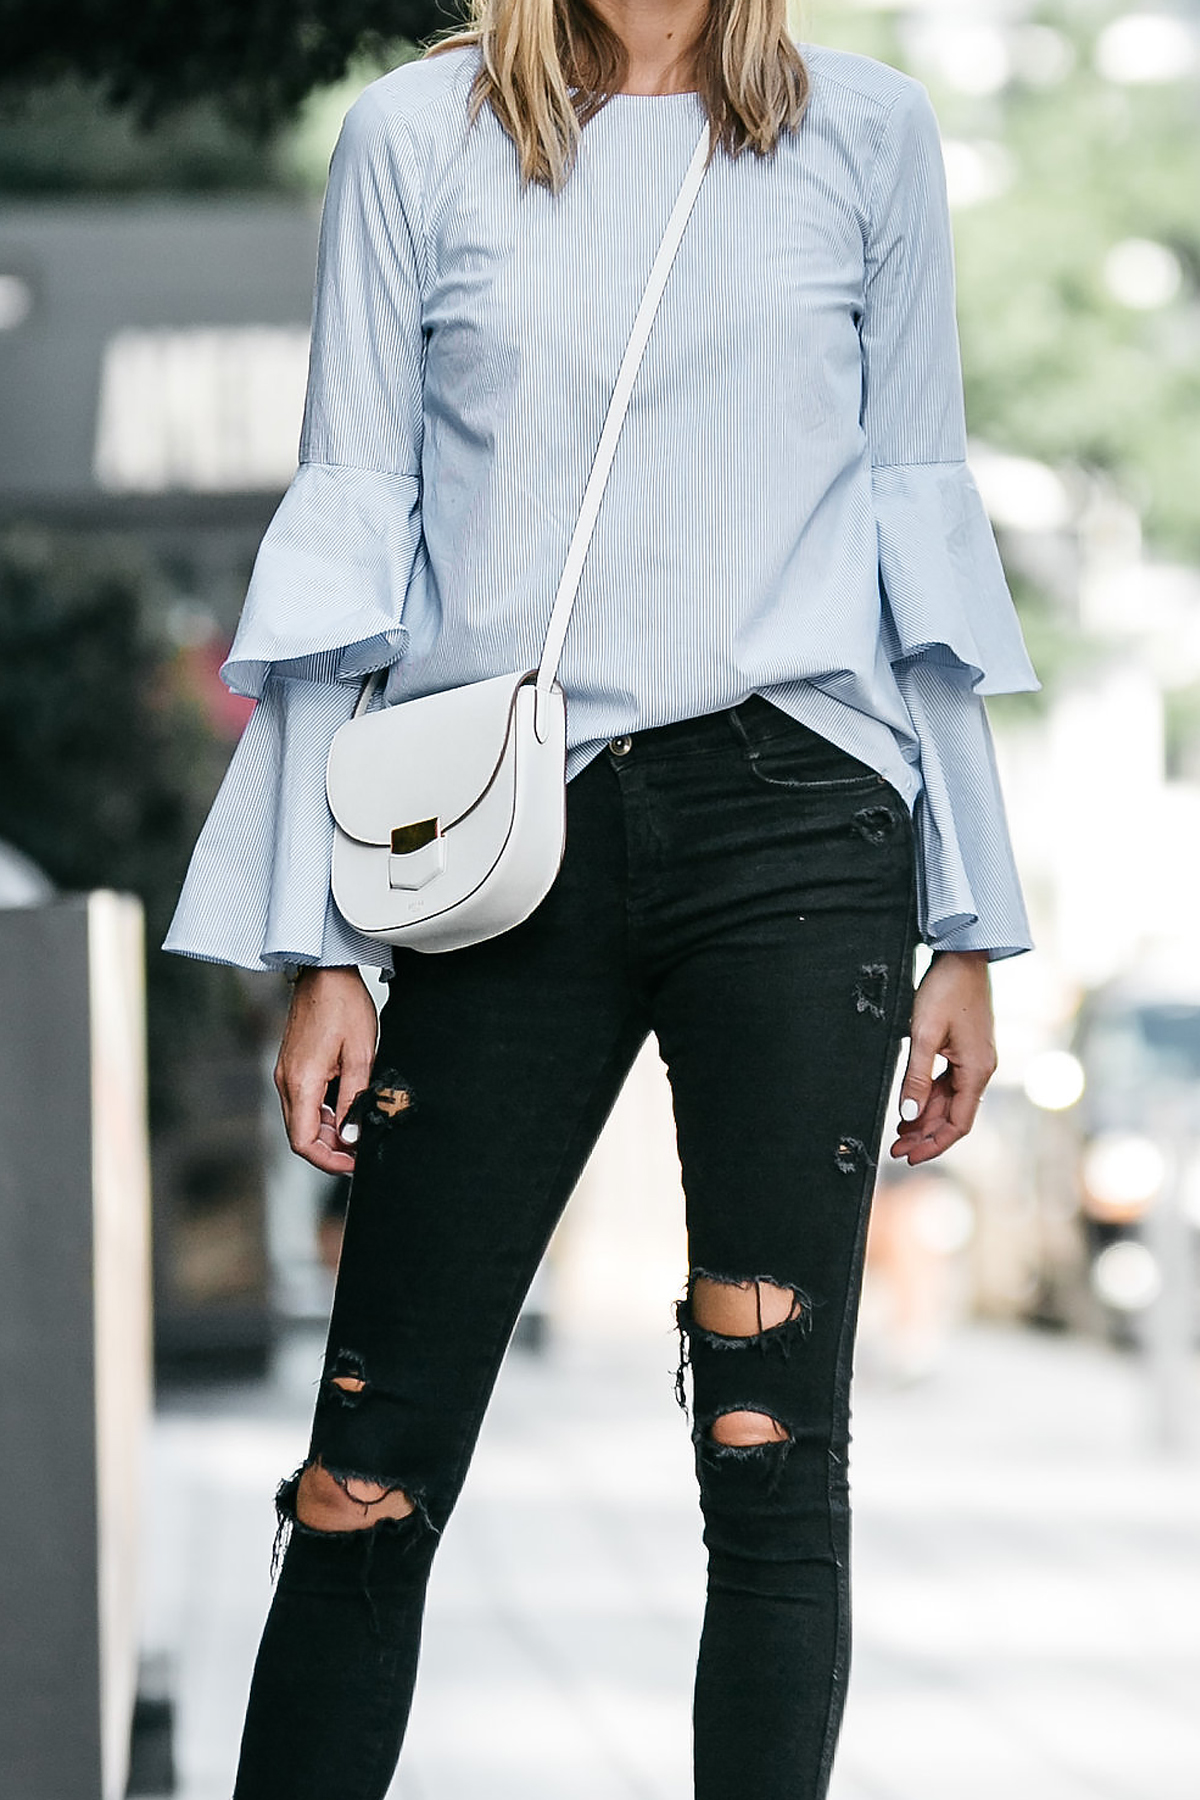 Nordstrom Blue Bell Sleeve Top Black Ripped Skinny Jeans Outfit Celine Trotteur White Crossbody Fashion Jackson Dallas Blogger Fashion Blogger Street Style